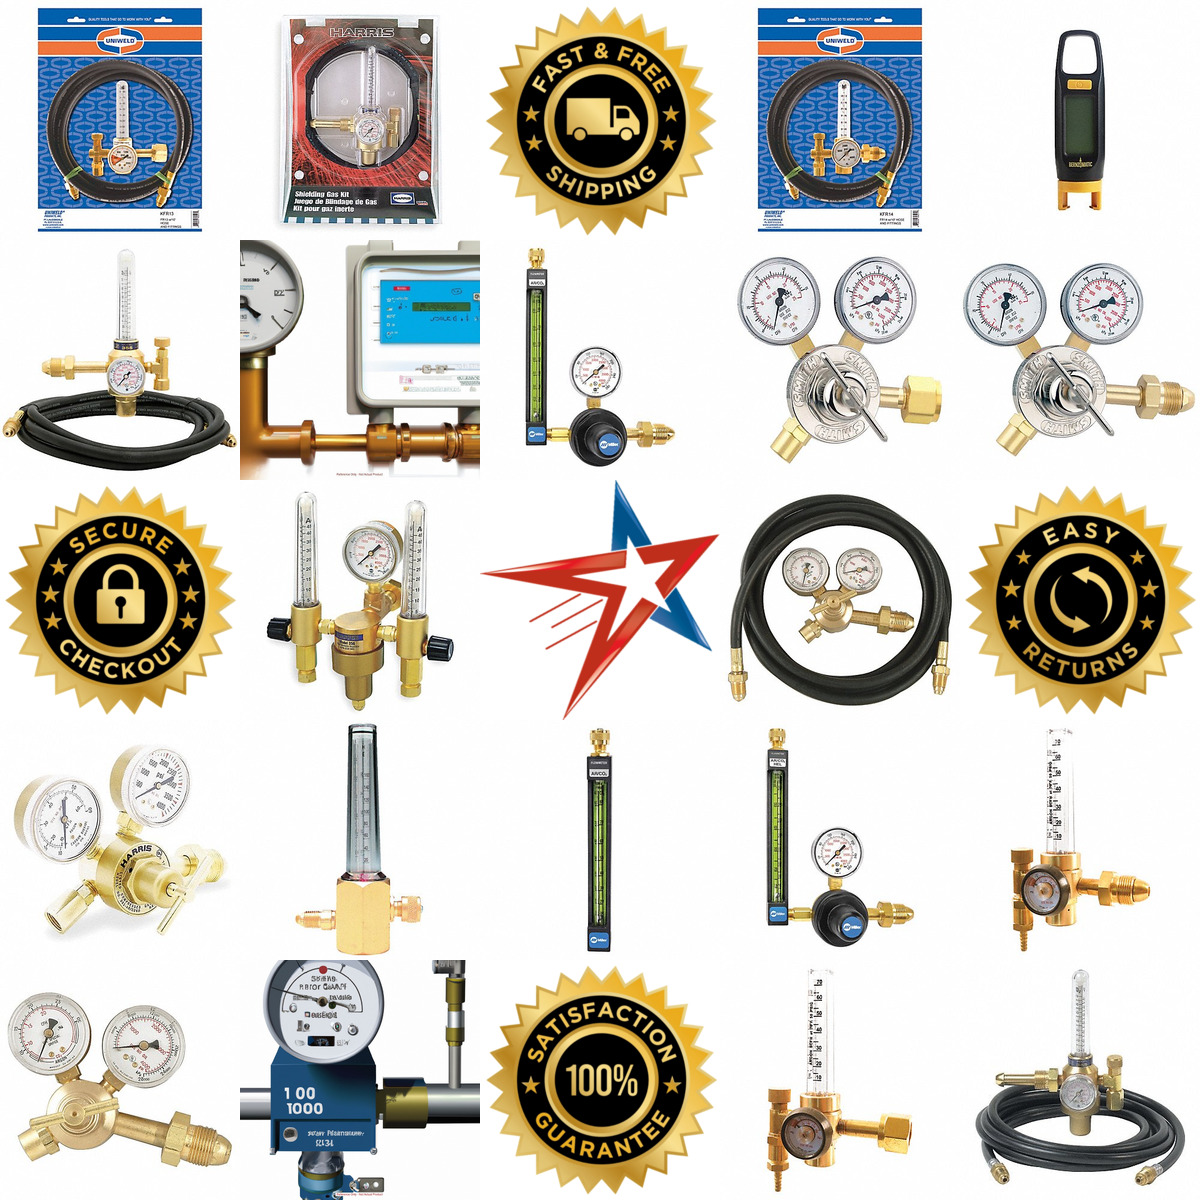 A selection of Gas Flowmeters Flowmeter Regulators and Flow Gaug products on GoVets